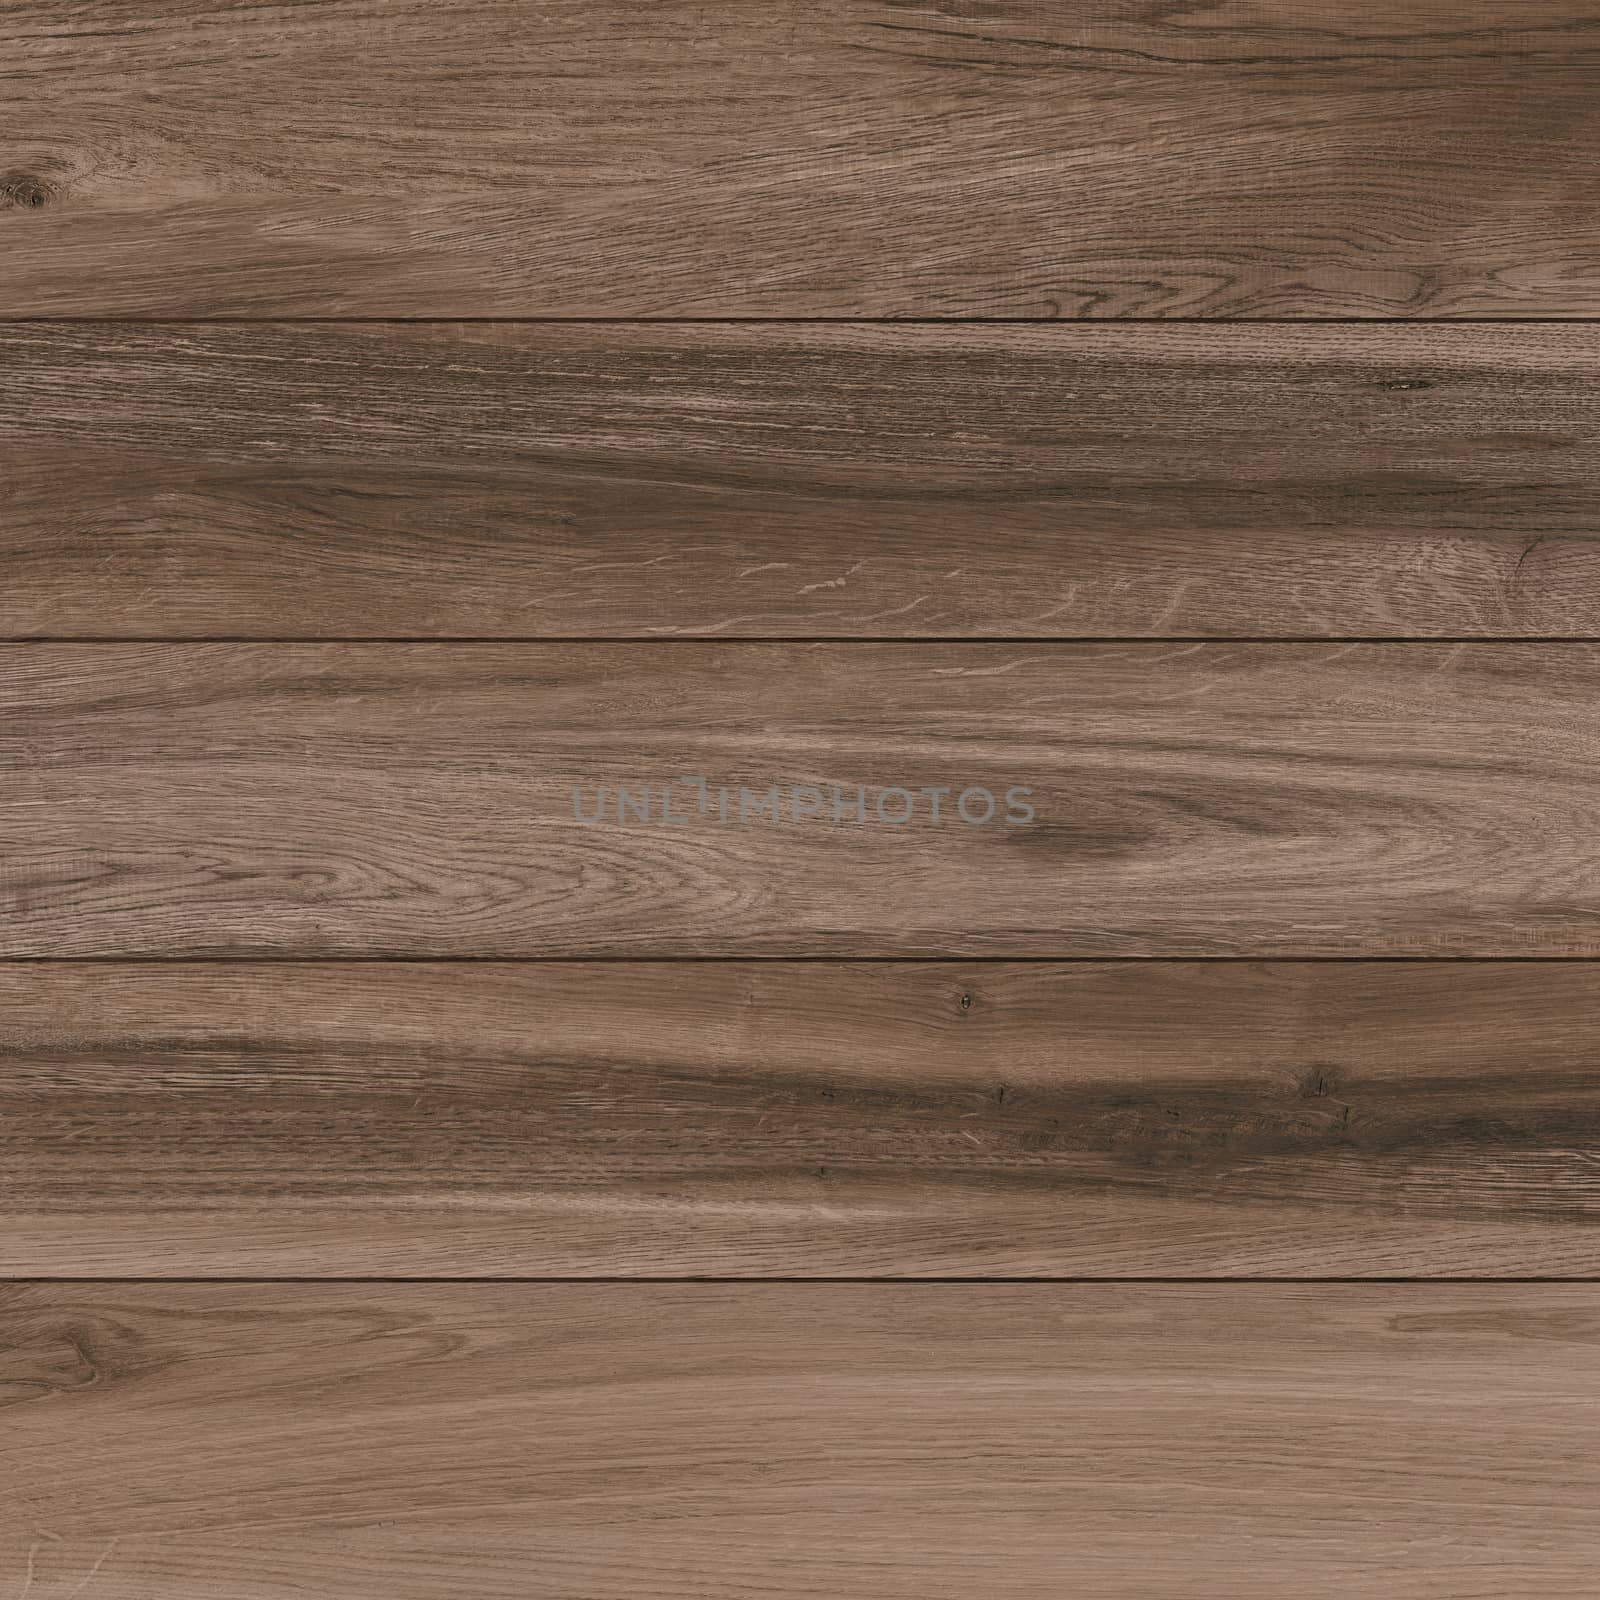 Wood Texture Background. High.Res.